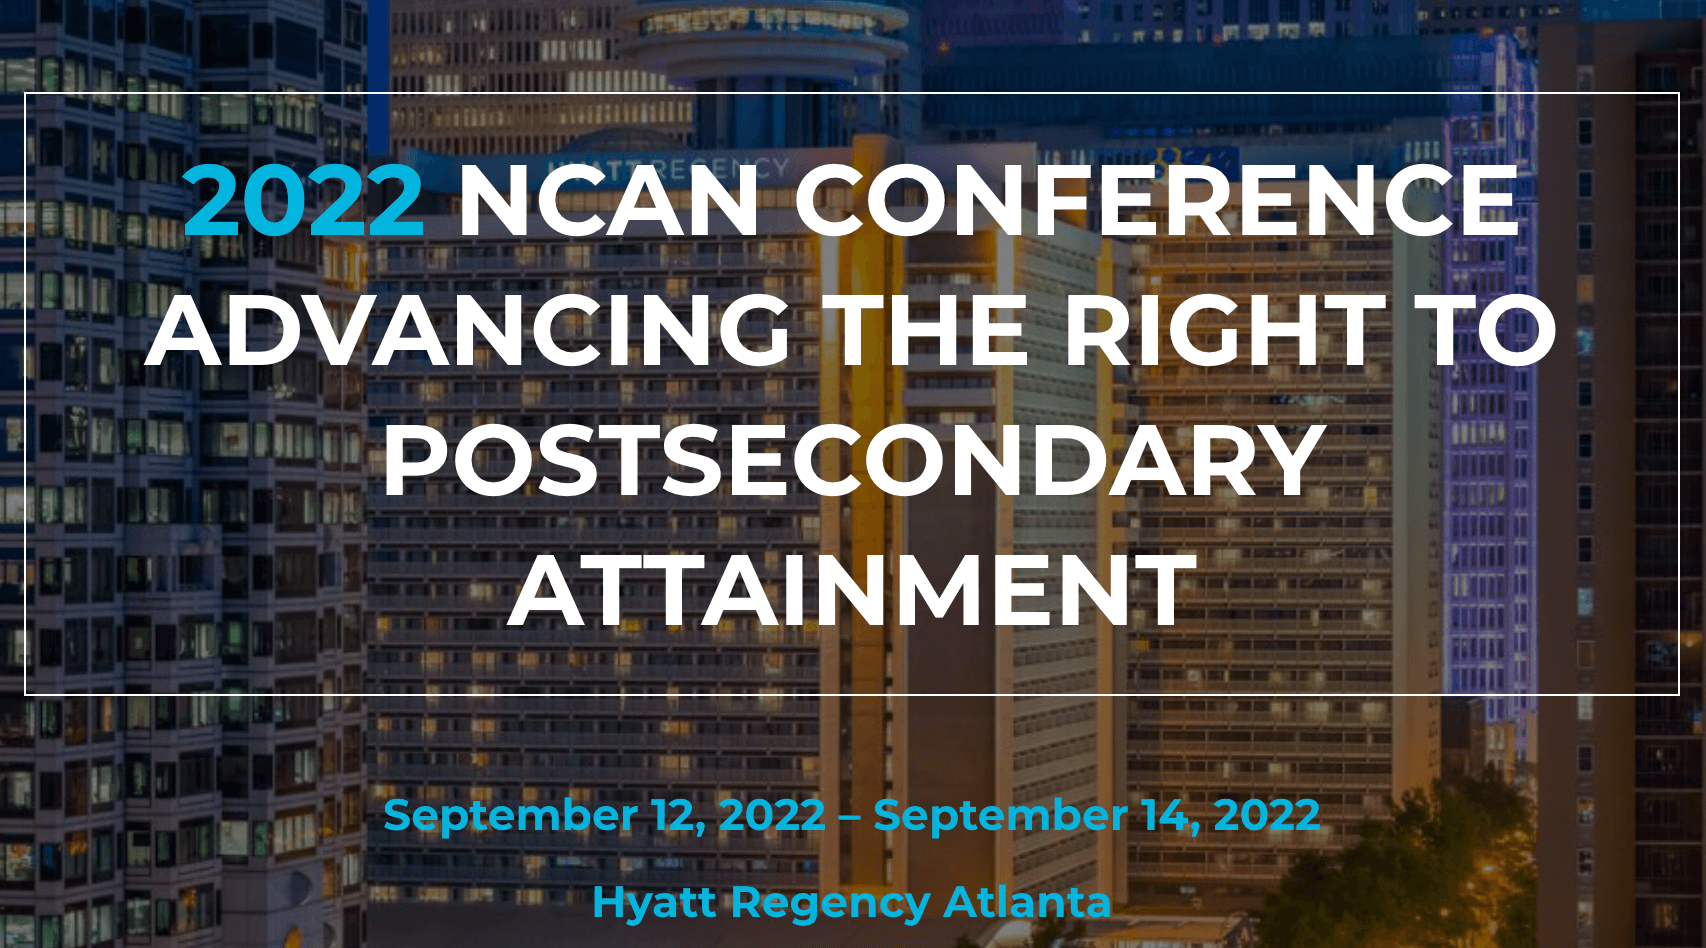 2022 NCAN Conference